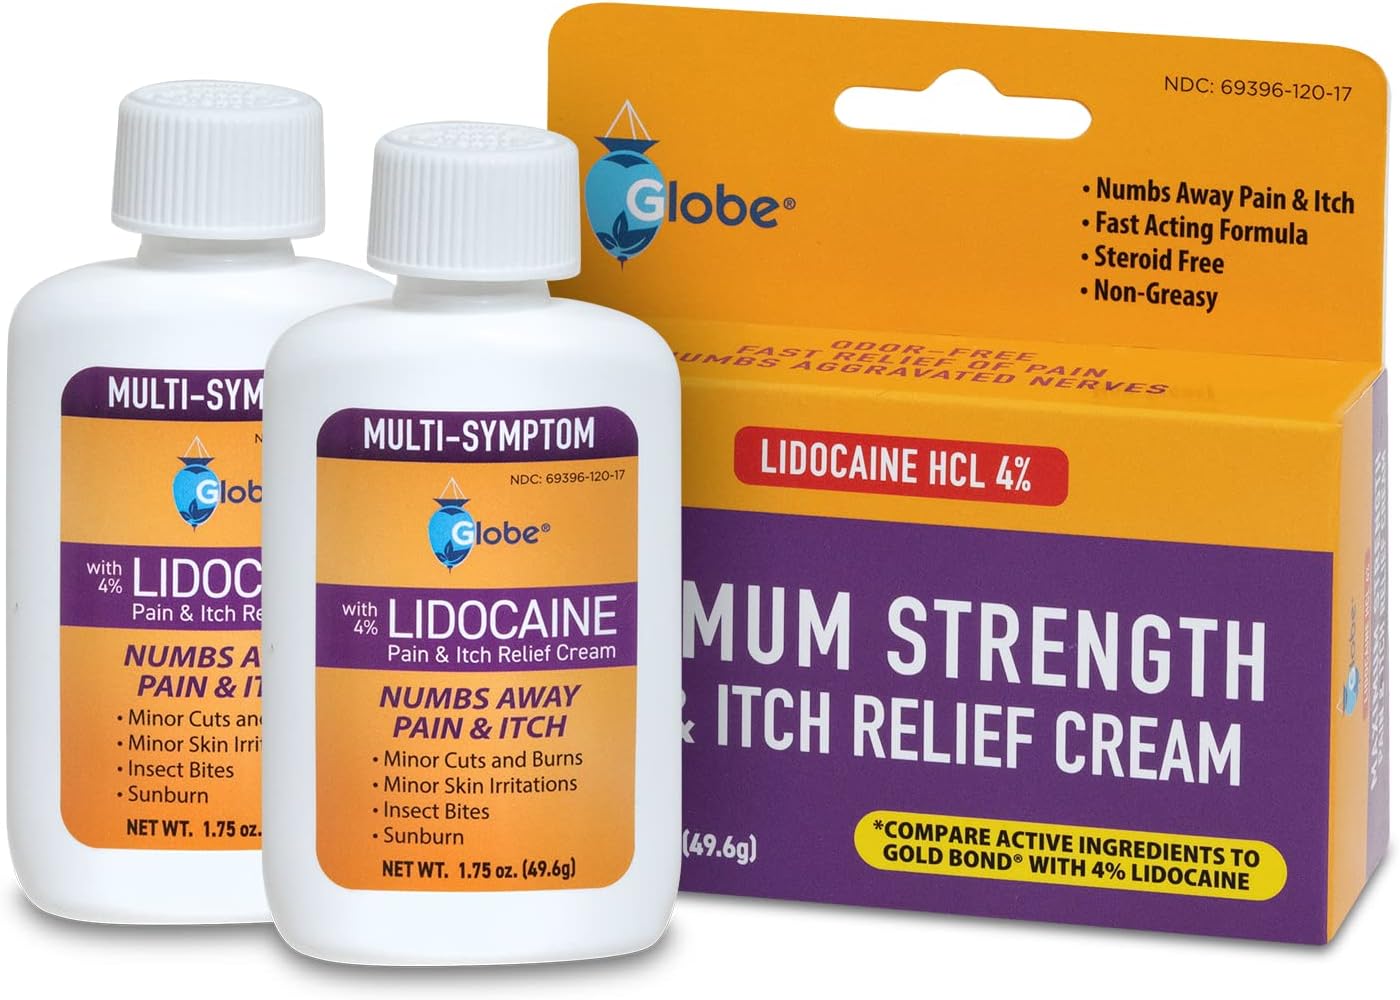 Globe (2 Pack) Lidocaine 4% Multi-Symptom Relief Cream 1.75 oz, Numbs Away Pain & Itch, Steroid Free Non-Greasy Formula (Compare to Gold Bond w/Lidocaine)